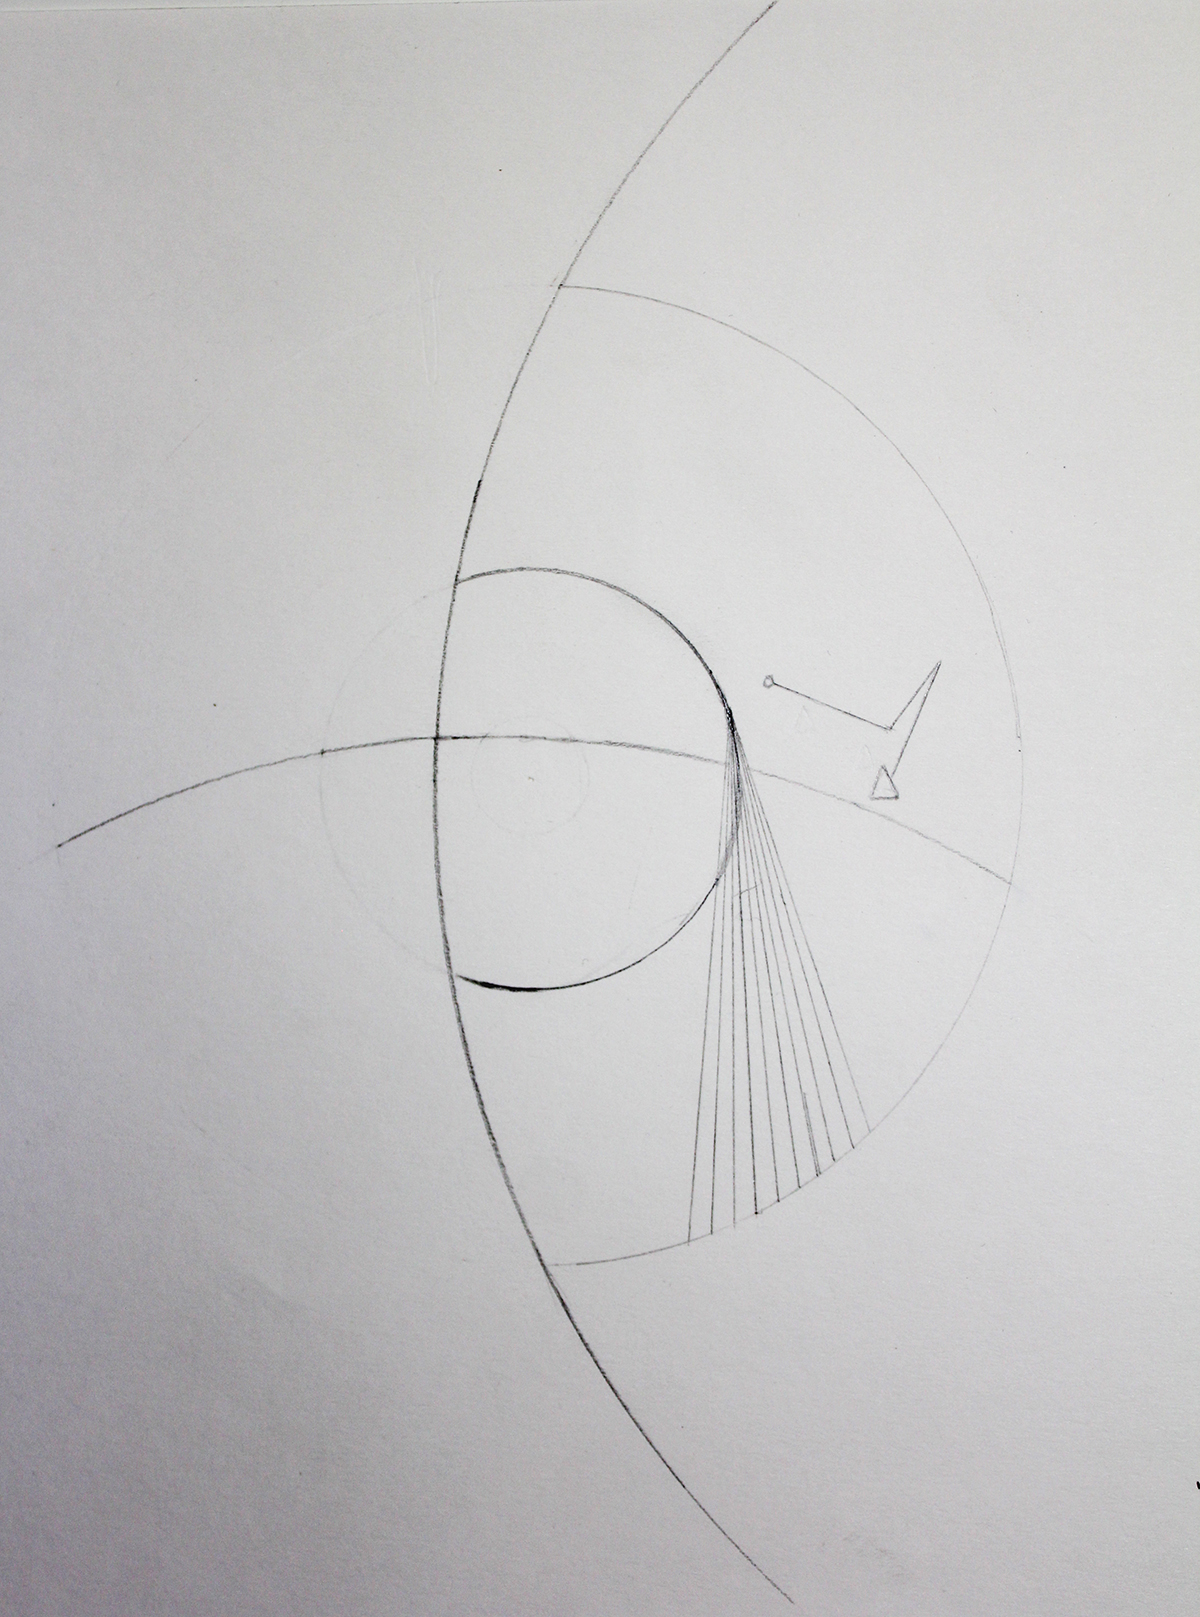  Abstract geometry based on recorded flight patterns.  Pencil on paper 